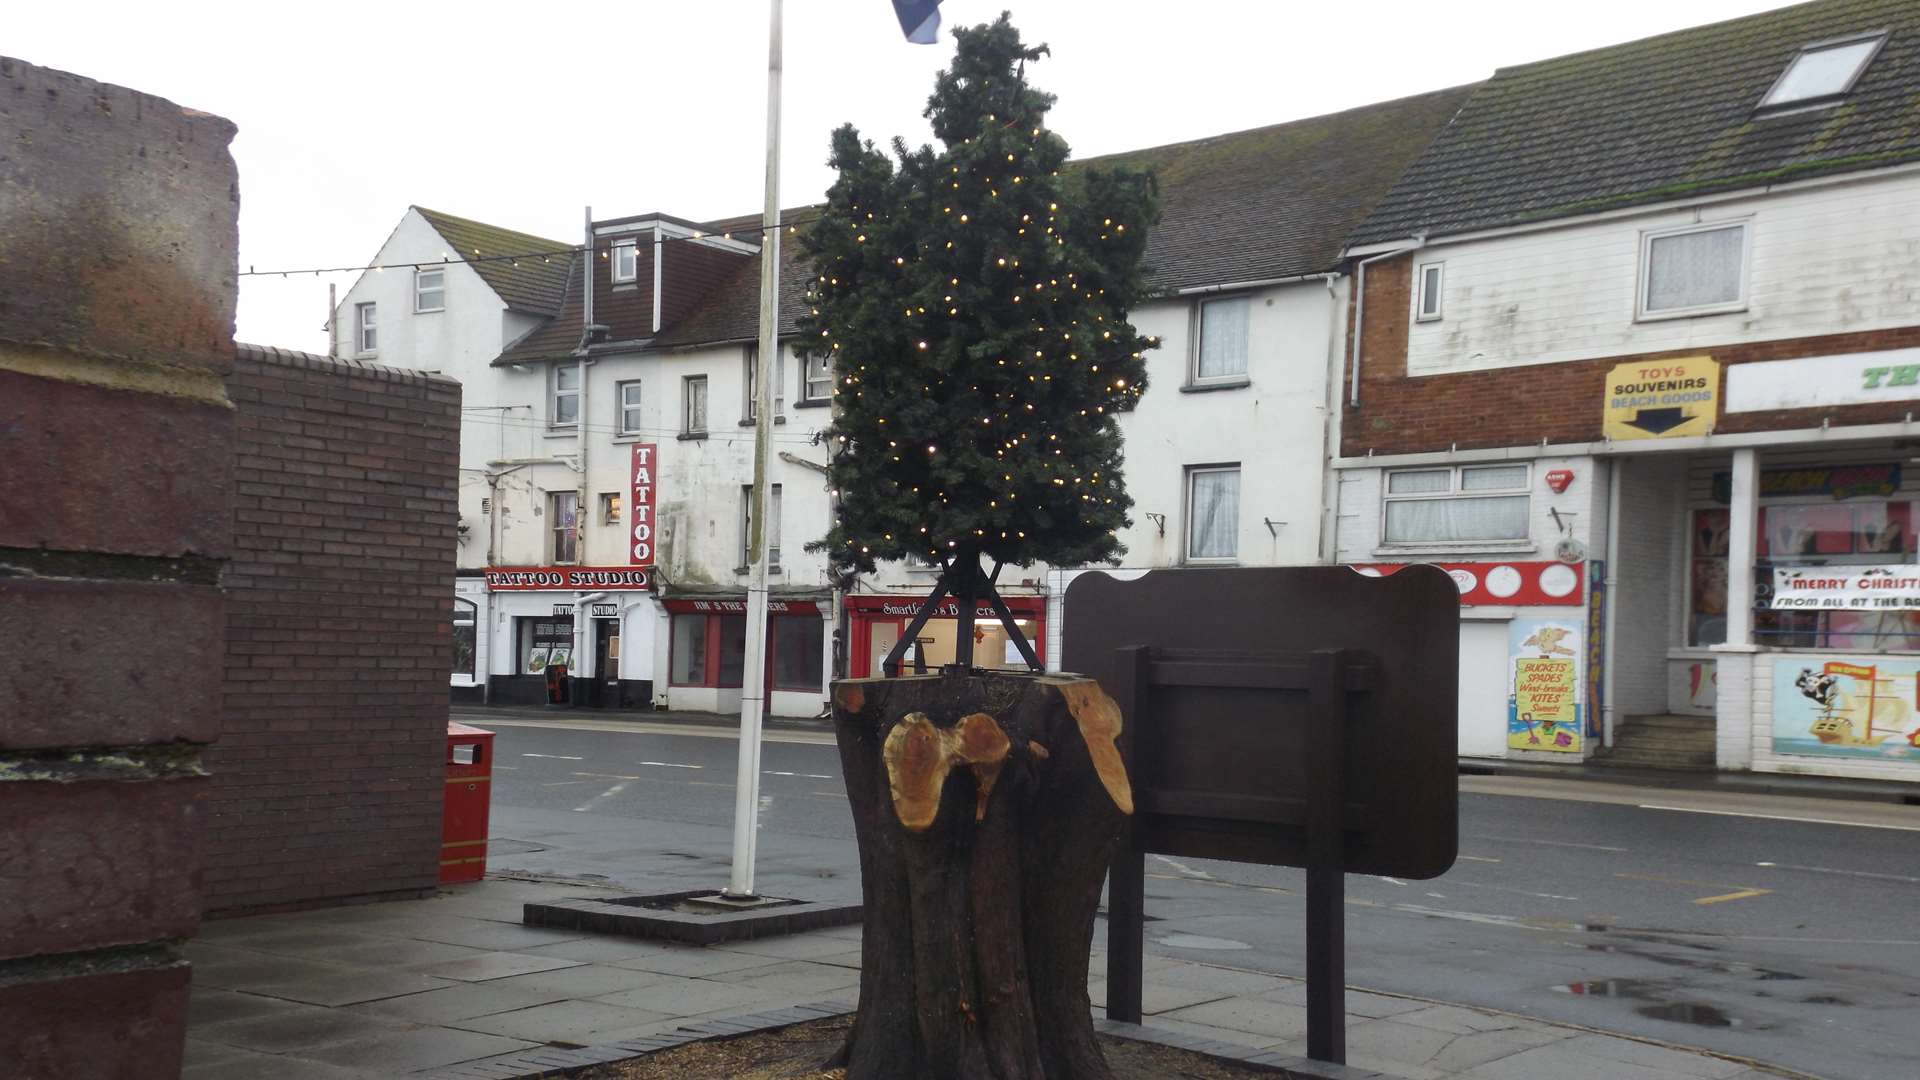 The sad tree was mounted on a stump outside public toilets